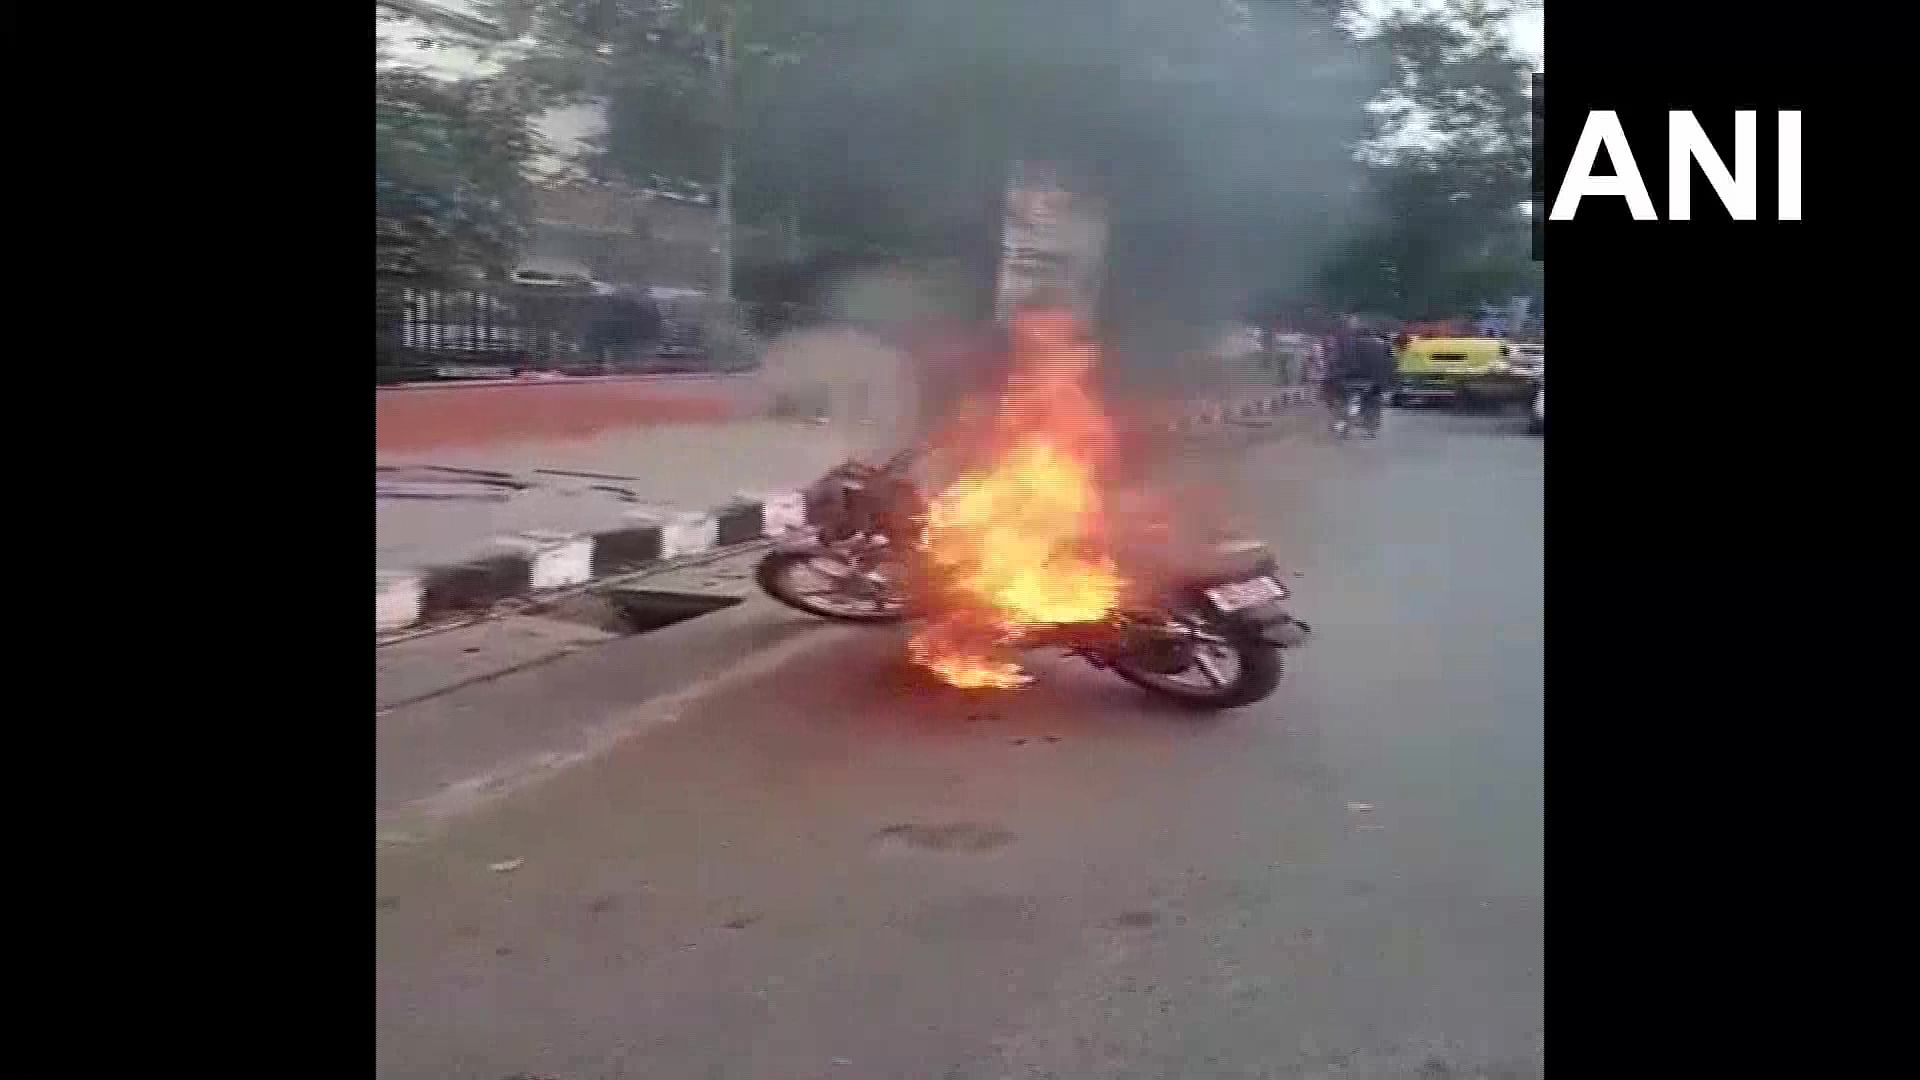 The traffic police challaned him and impounded the motorcycle, following which Vikas set the bike on fire. (Photo/ANI)